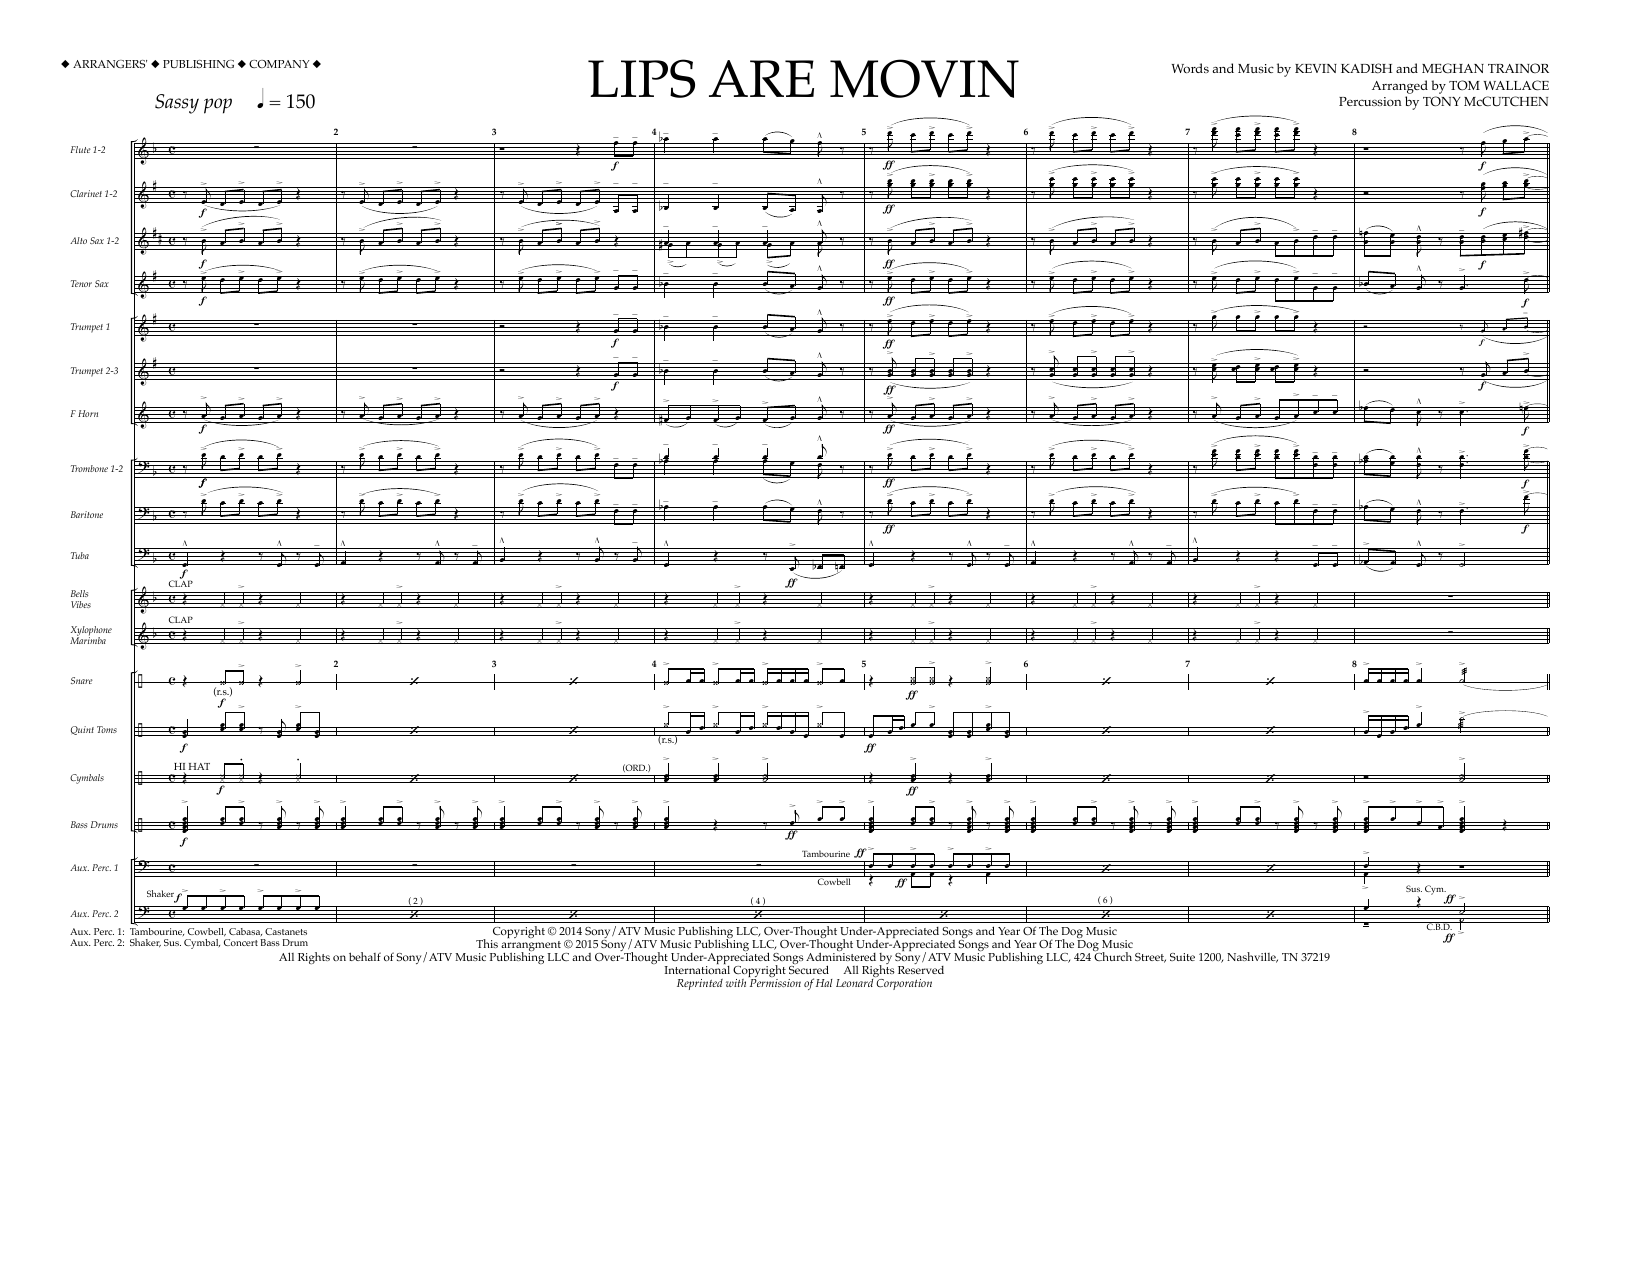 Download Tom Wallace Lips Are Movin - Full Score Sheet Music